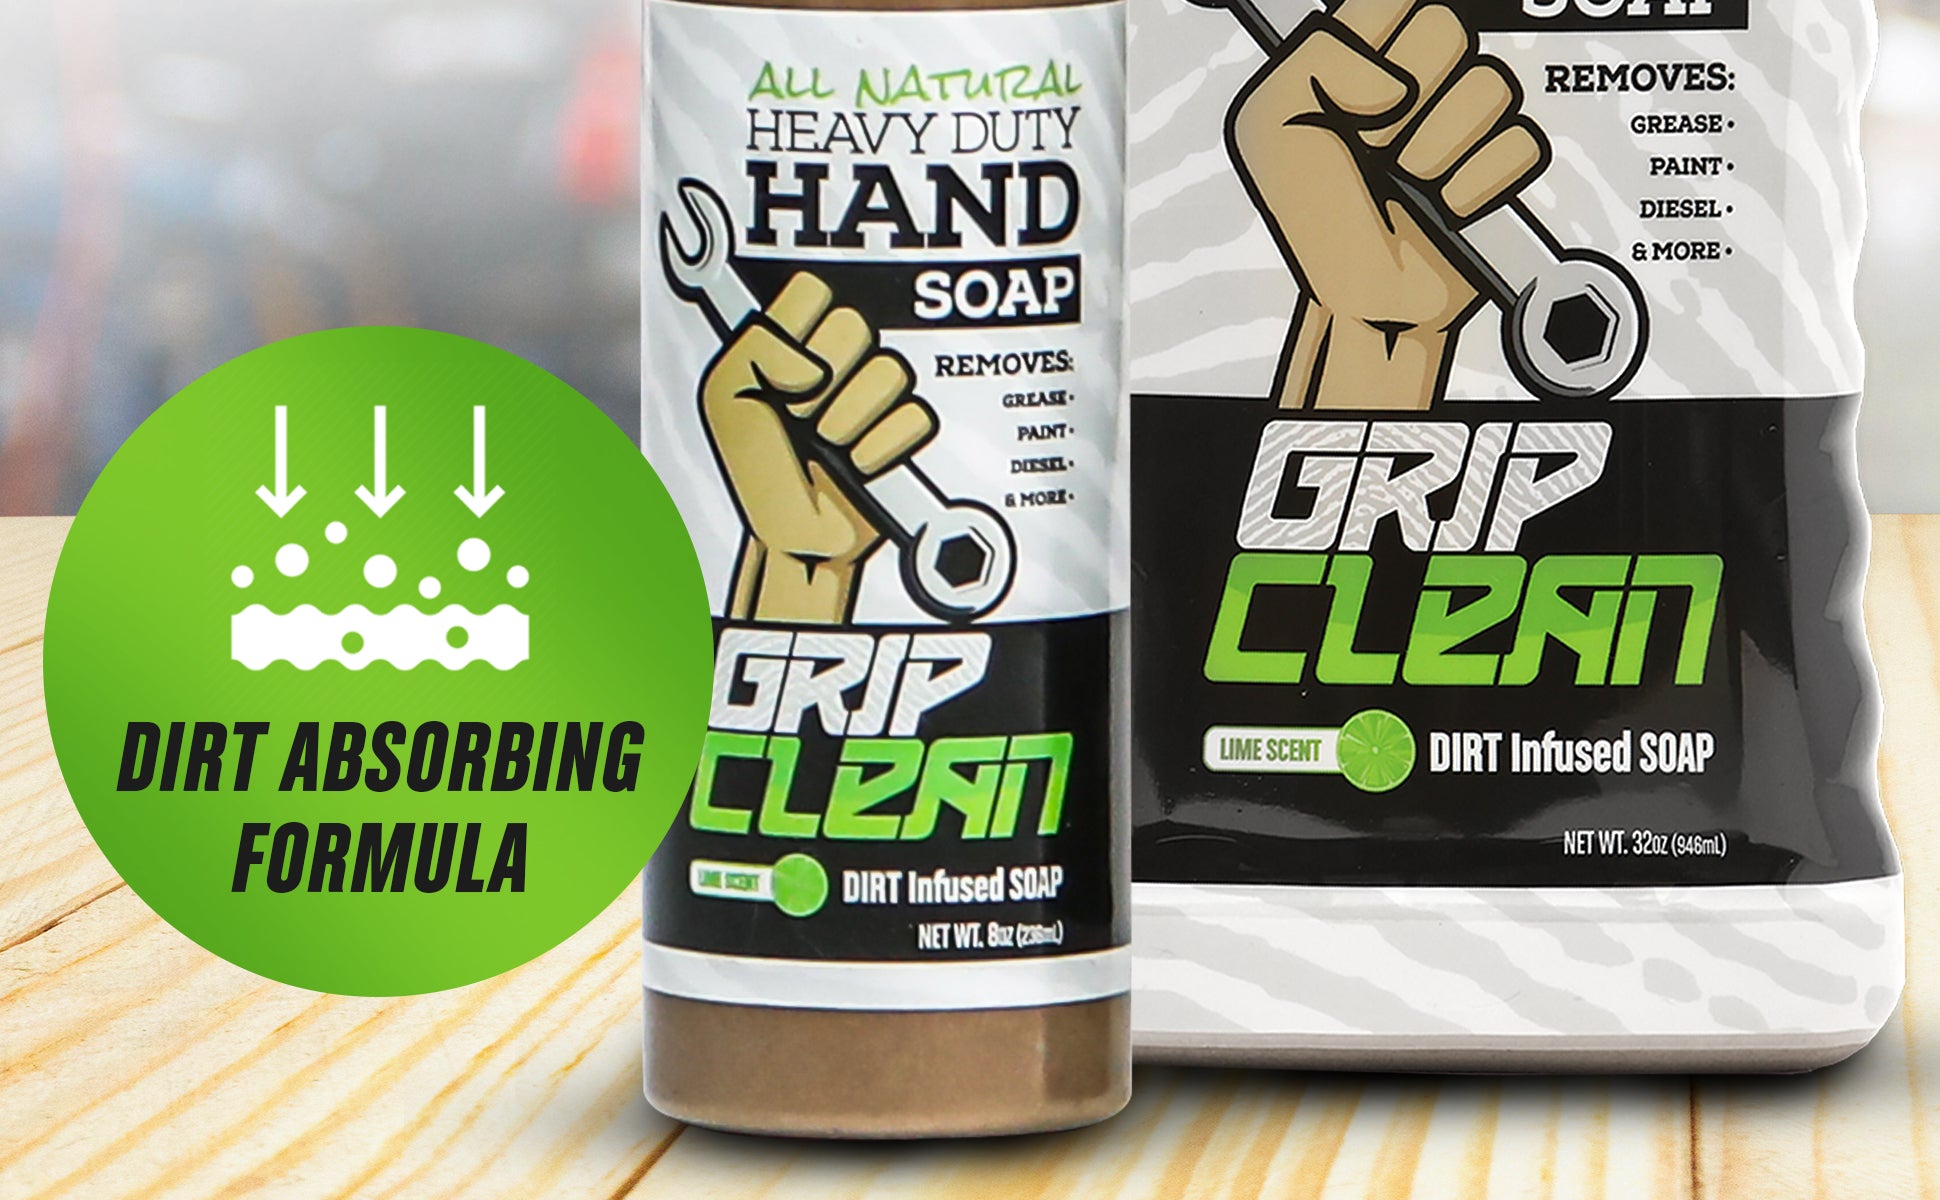  Grip Clean  Waterless Hand Cleaner for Auto Mechanics - Heavy  Duty Pumice Soap + Fingernail Brush, Industrial Strength for Dry Hands :  Beauty & Personal Care